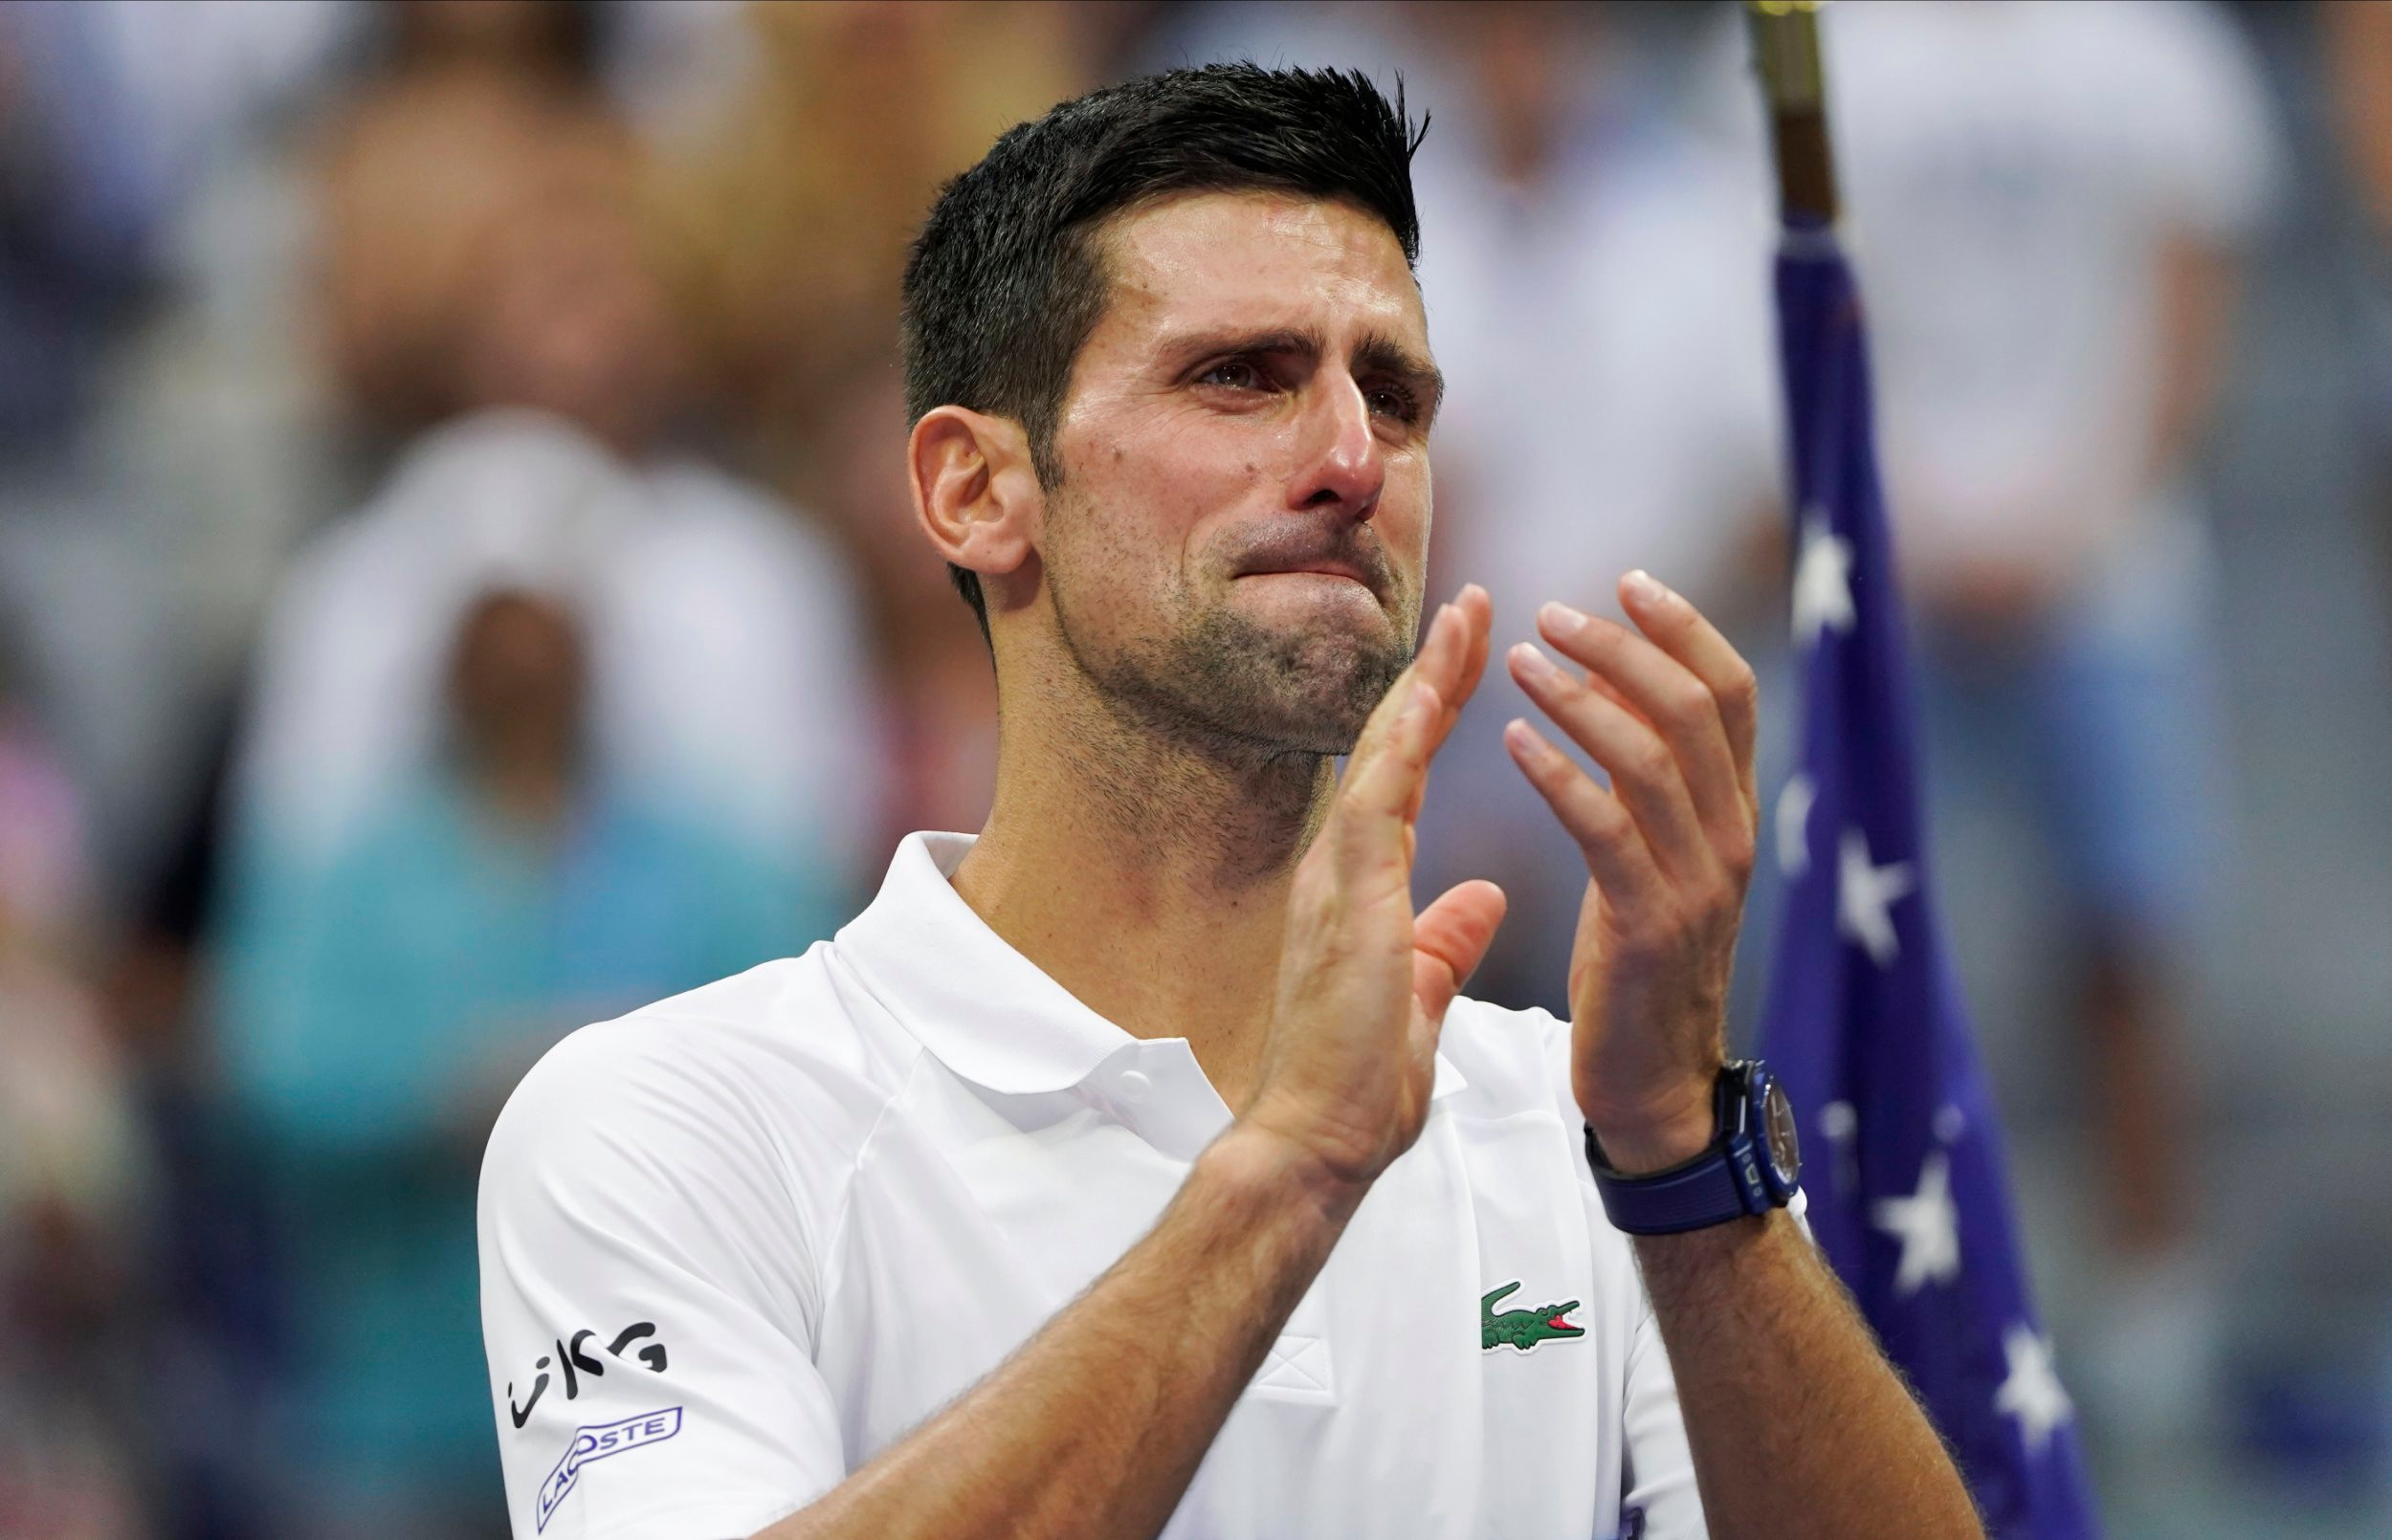 Novak Djokovic pays tribute to US Open crowd after breaking down in tears during final